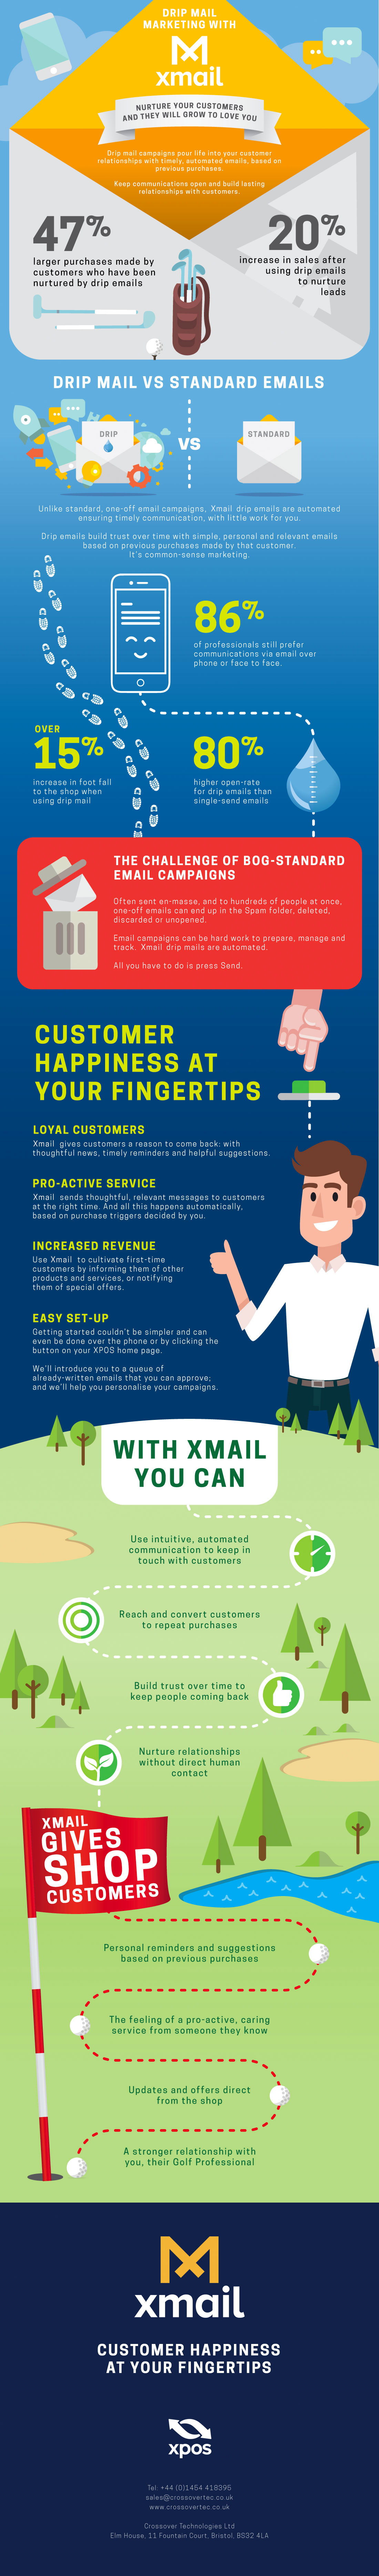 Drip Mail Marketing with XMAIL